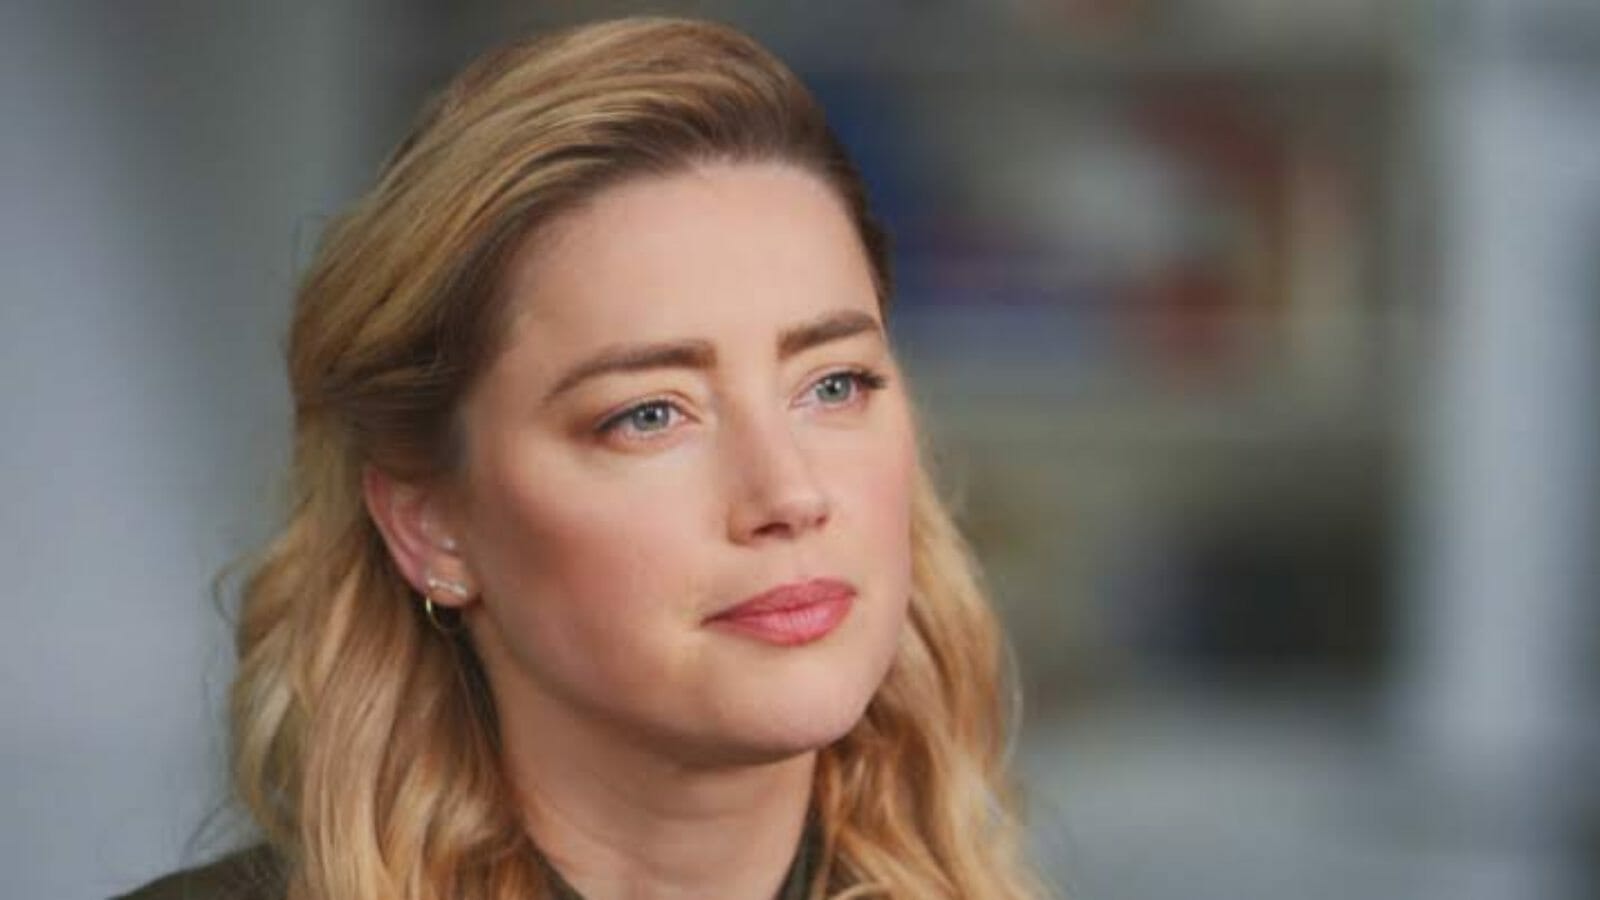 Amber Heard says that she will appeal the verdict of her defamation trial